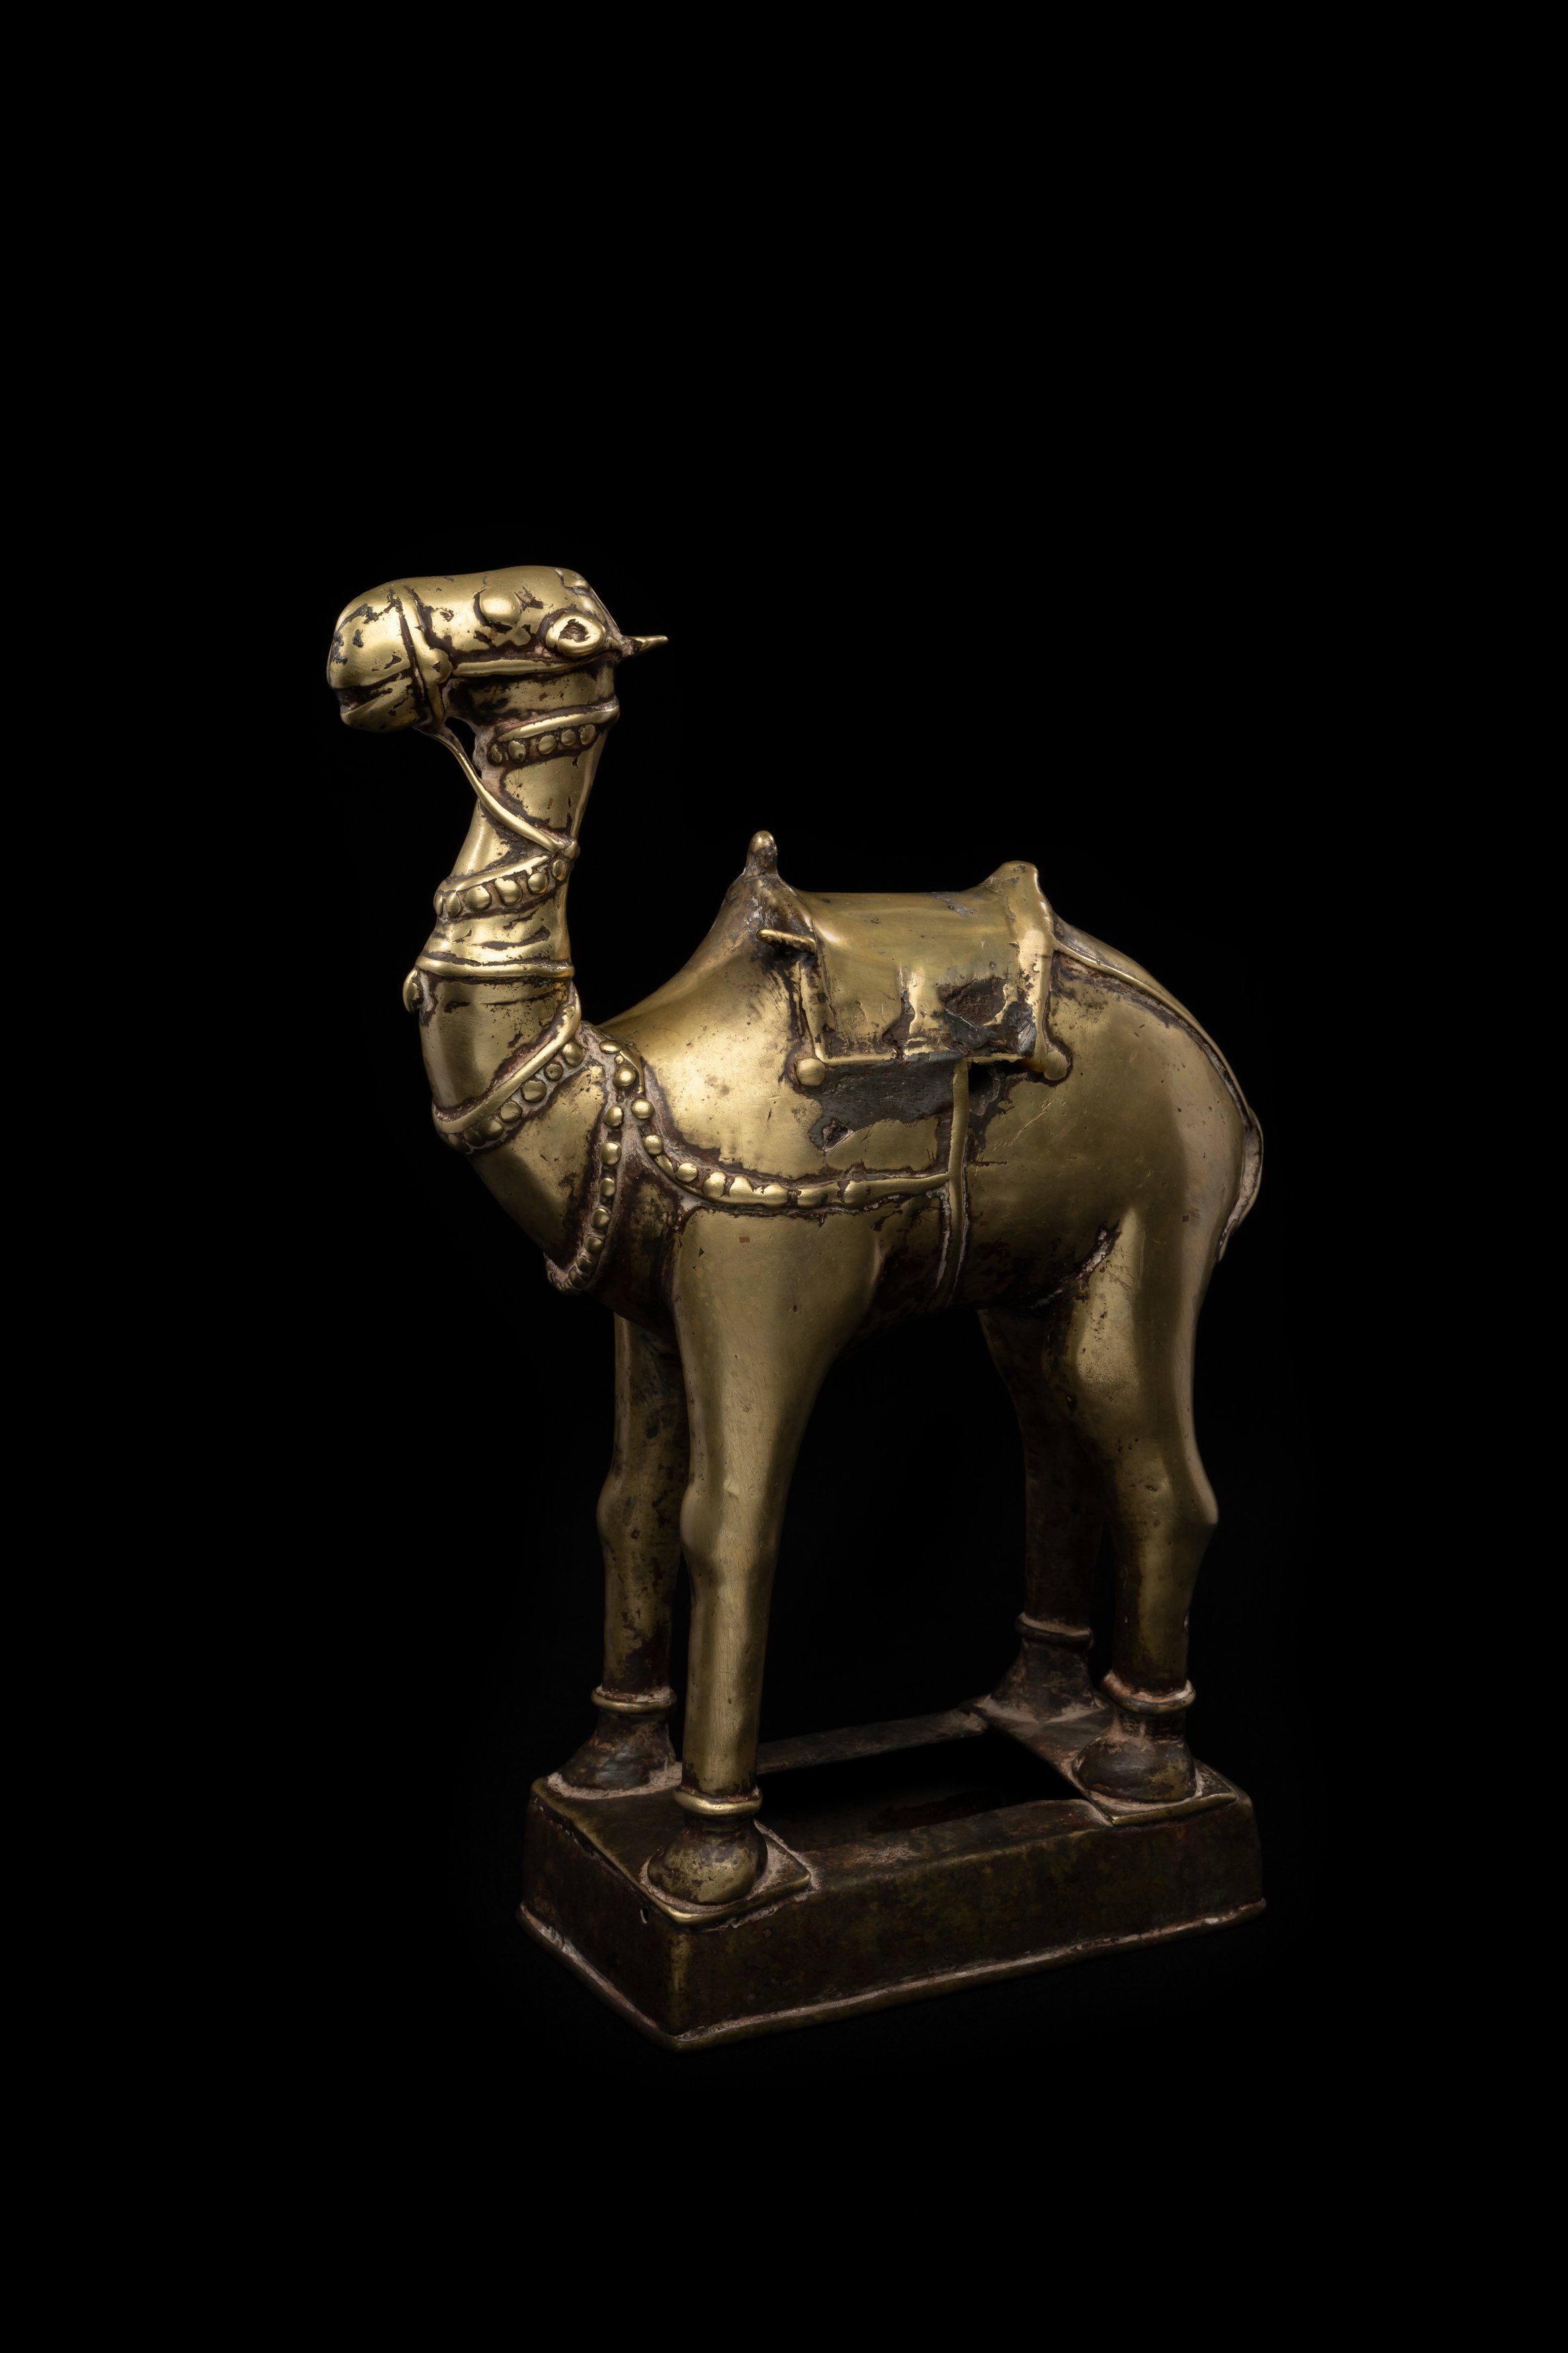 Brass Camel from Rajasthan, Bagshaw Museum